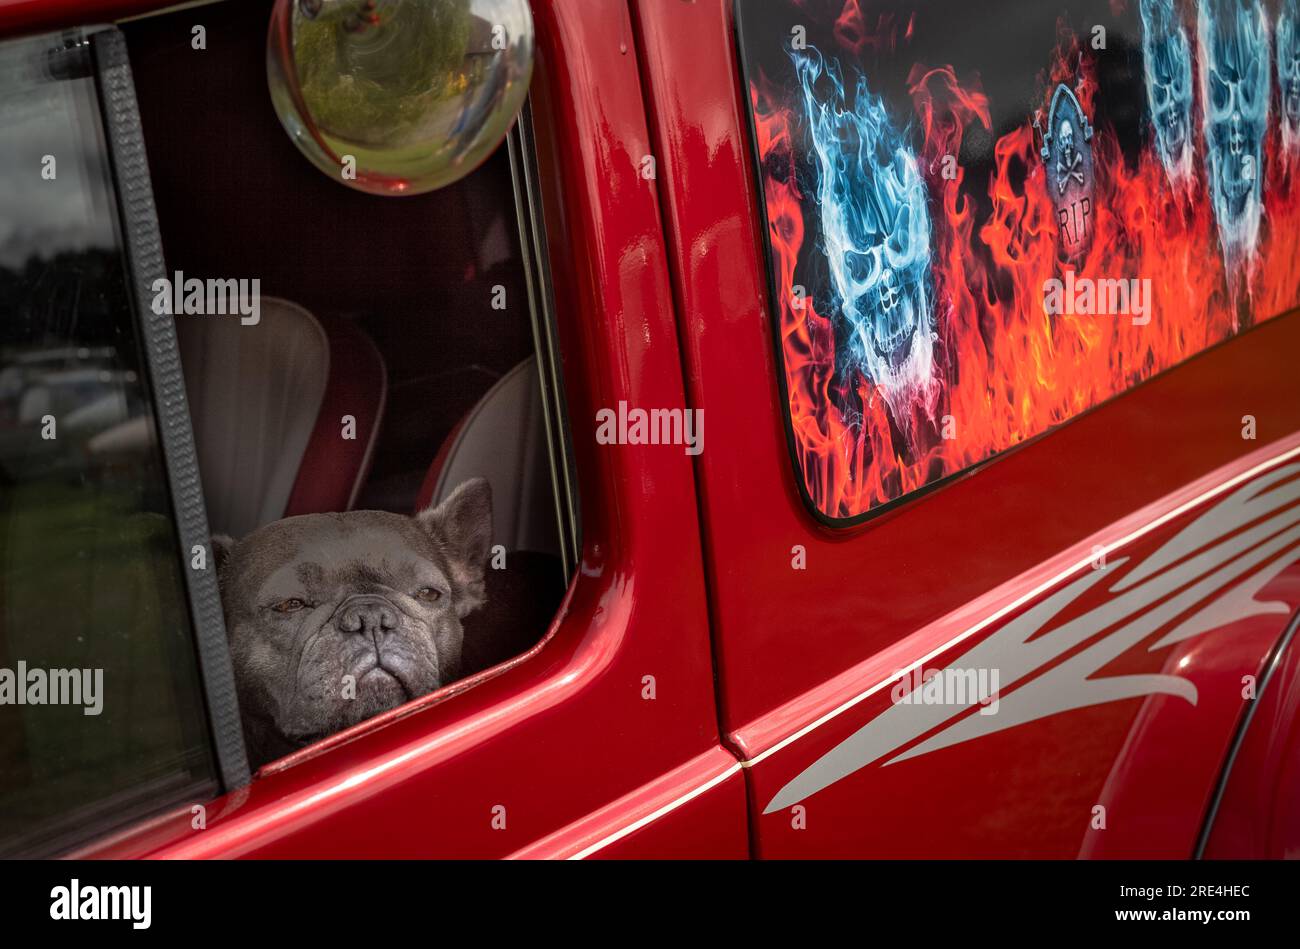 A pet dog looks out the window of a custom adapted vintage van at a classic car show in Storrington, West Sussex, UK. Stock Photo